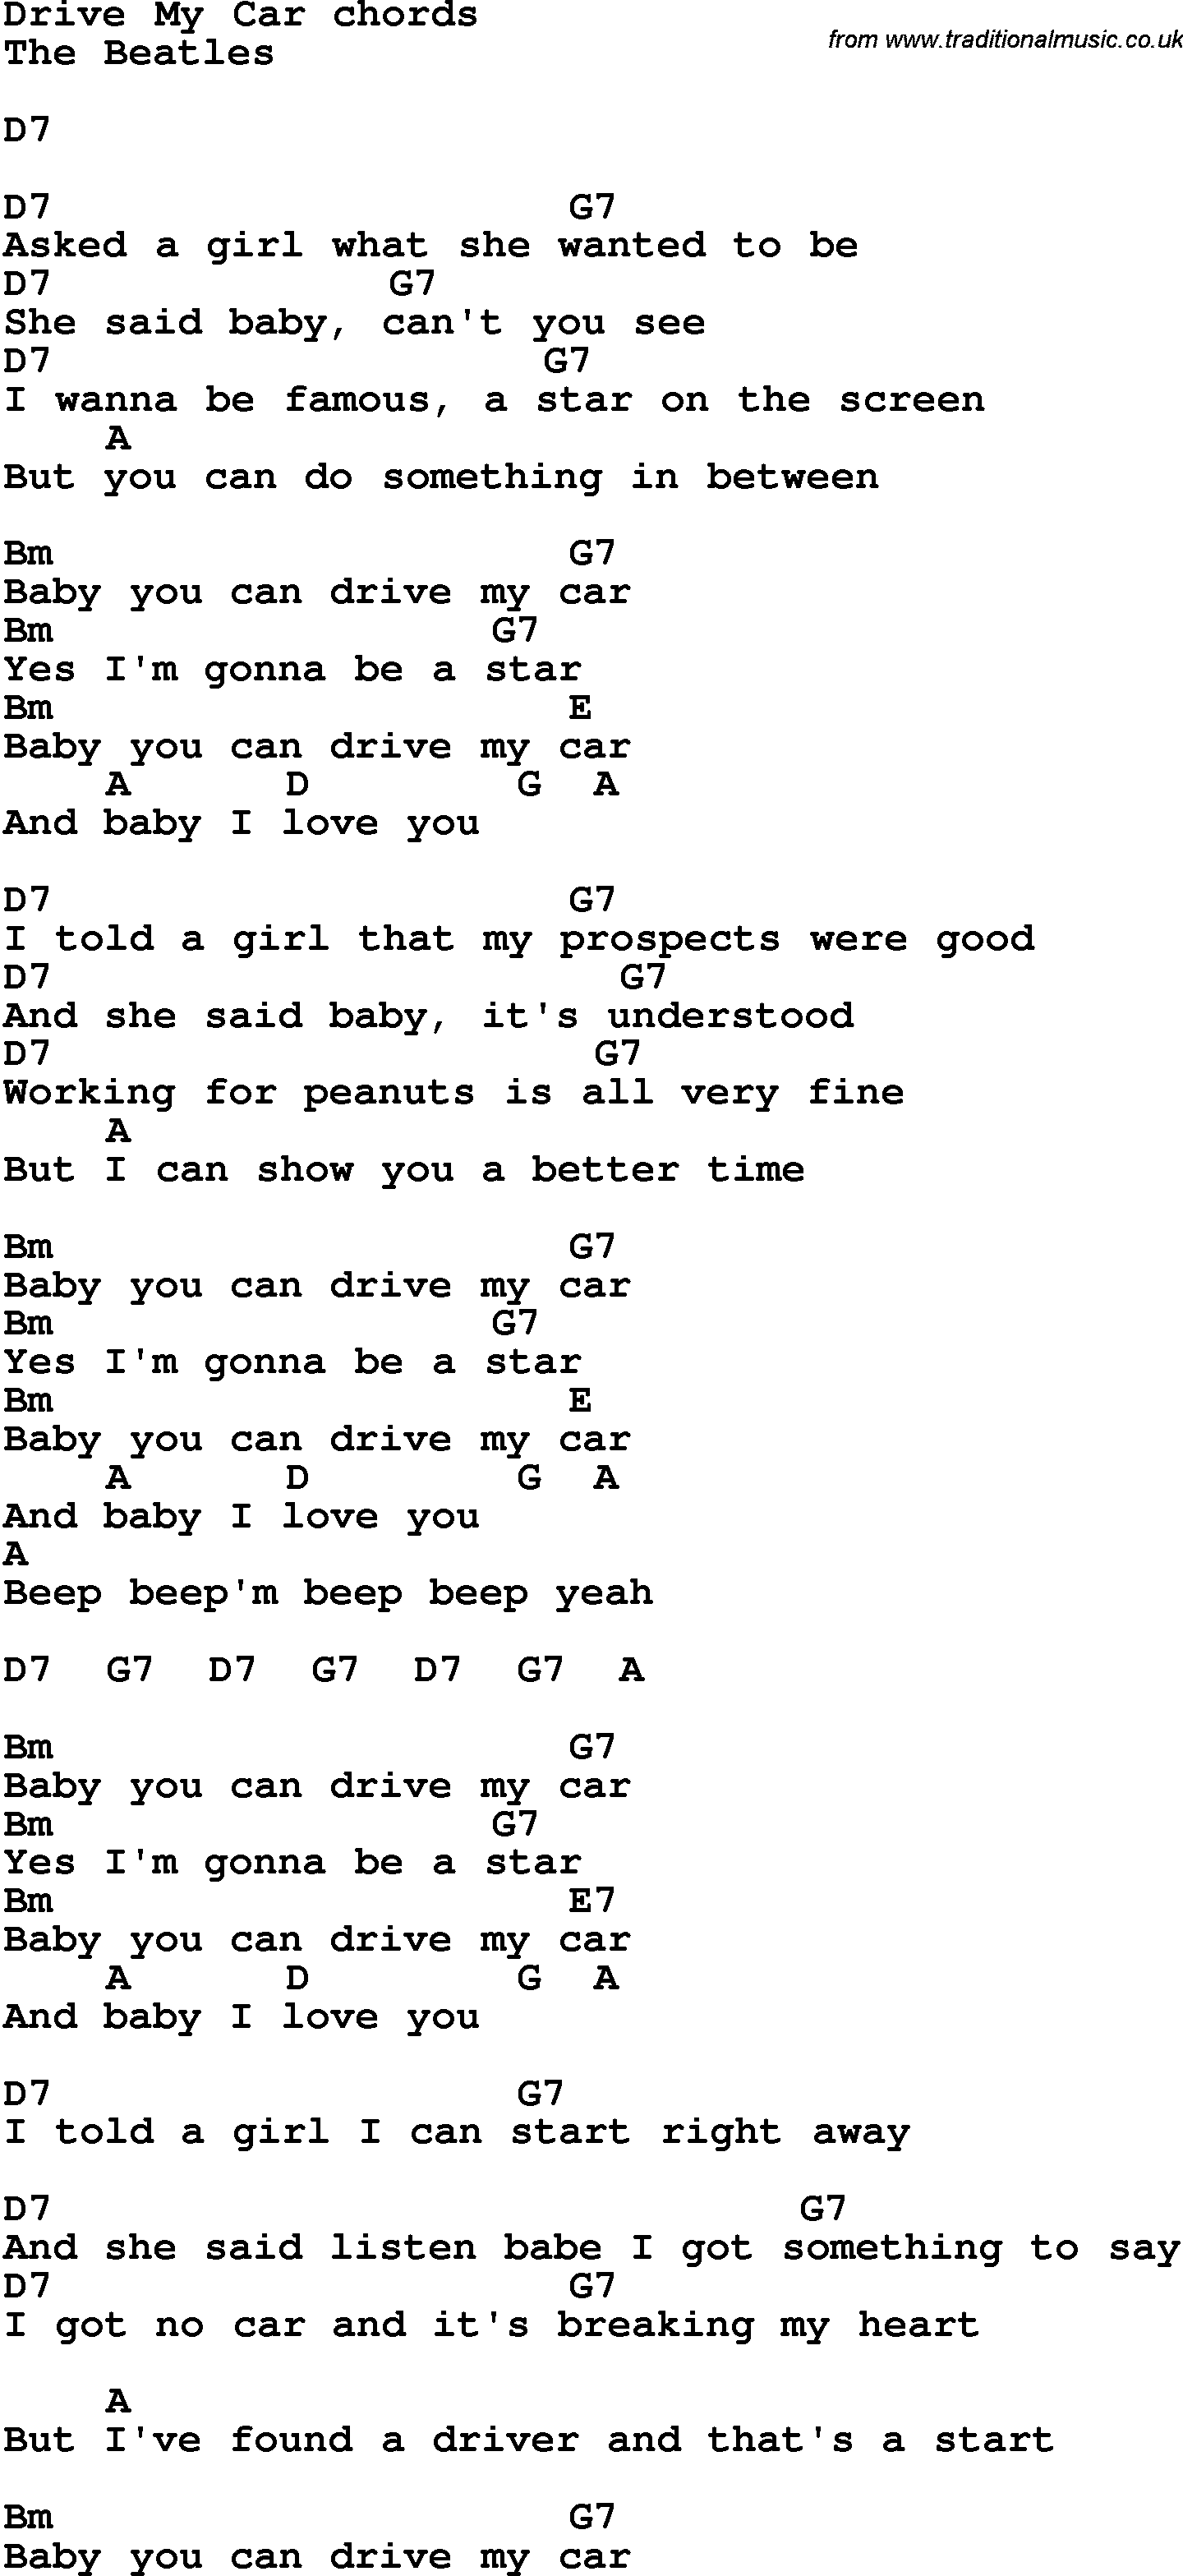 Song Lyrics with guitar chords for Drive My Car - The Beatles